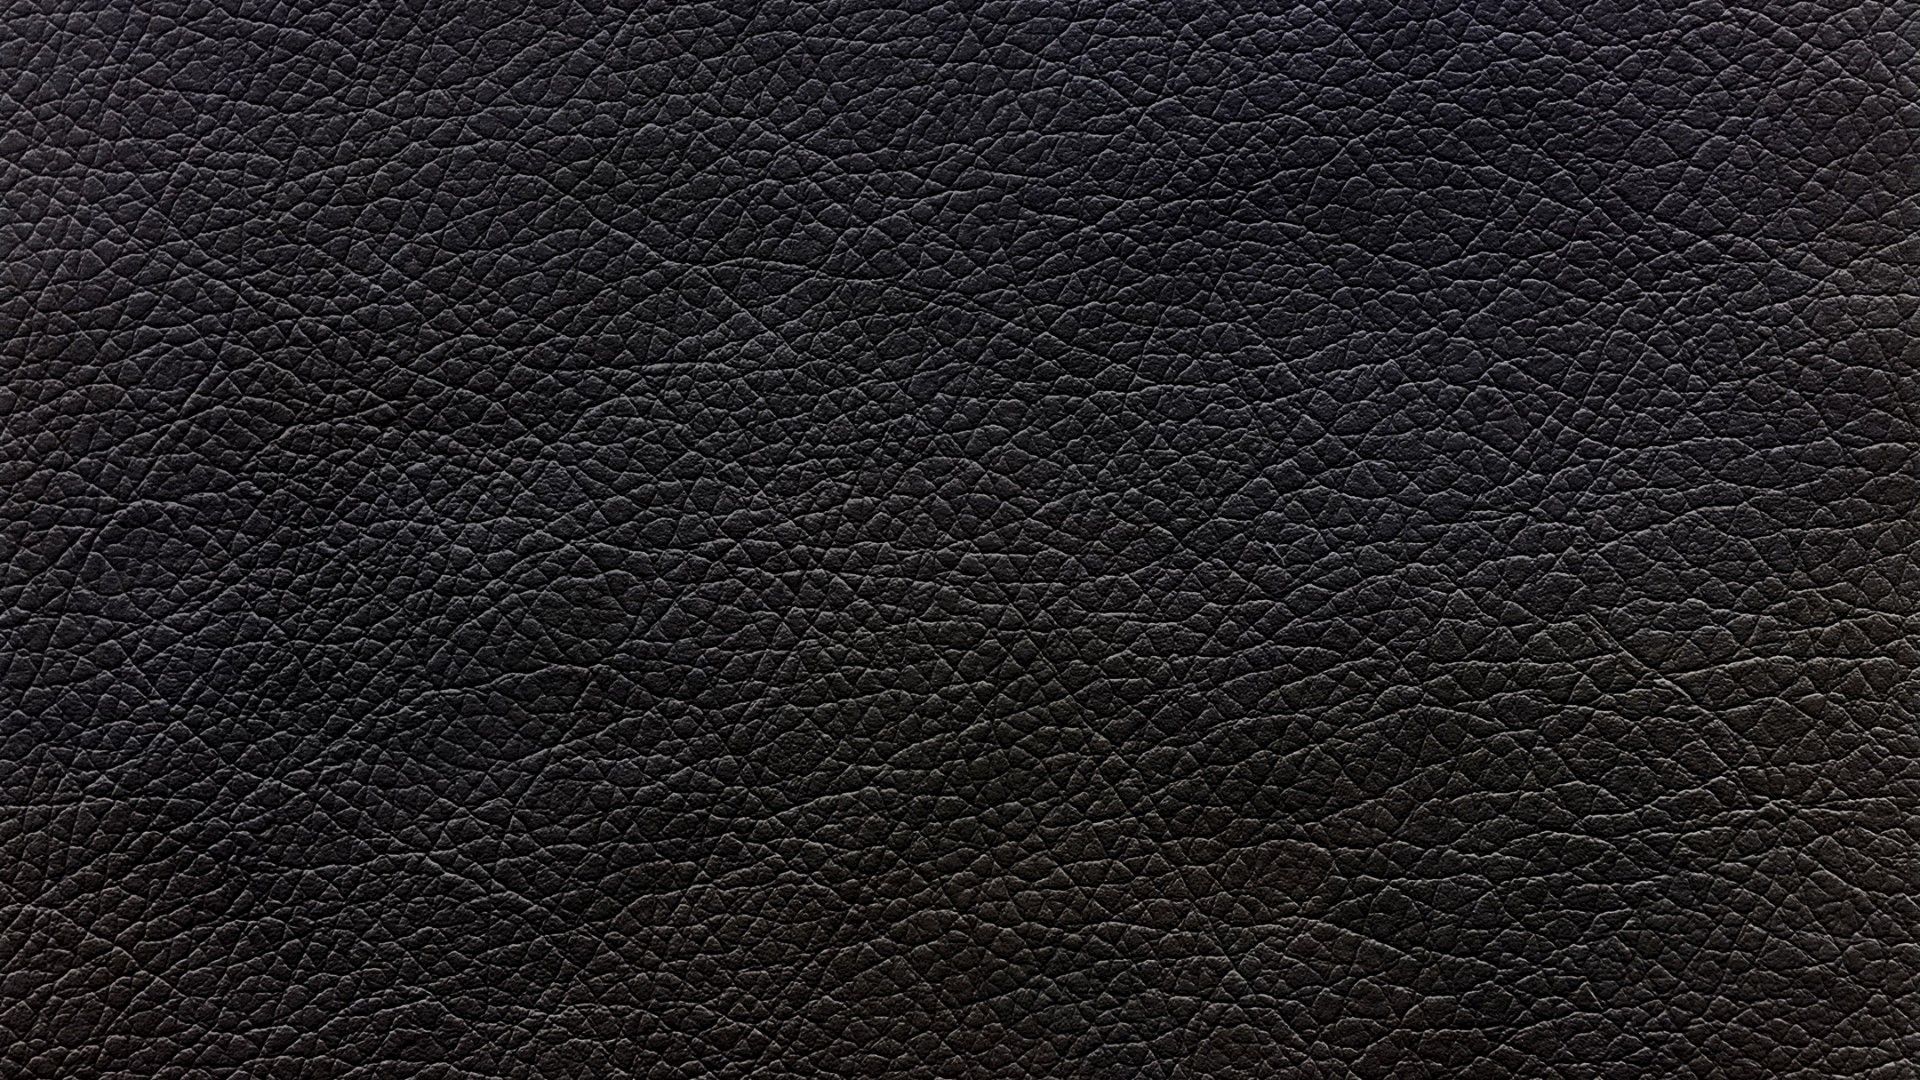 Leather Texture IPhone Wallpaper  IPhone Wallpapers  iPhone Wallpapers